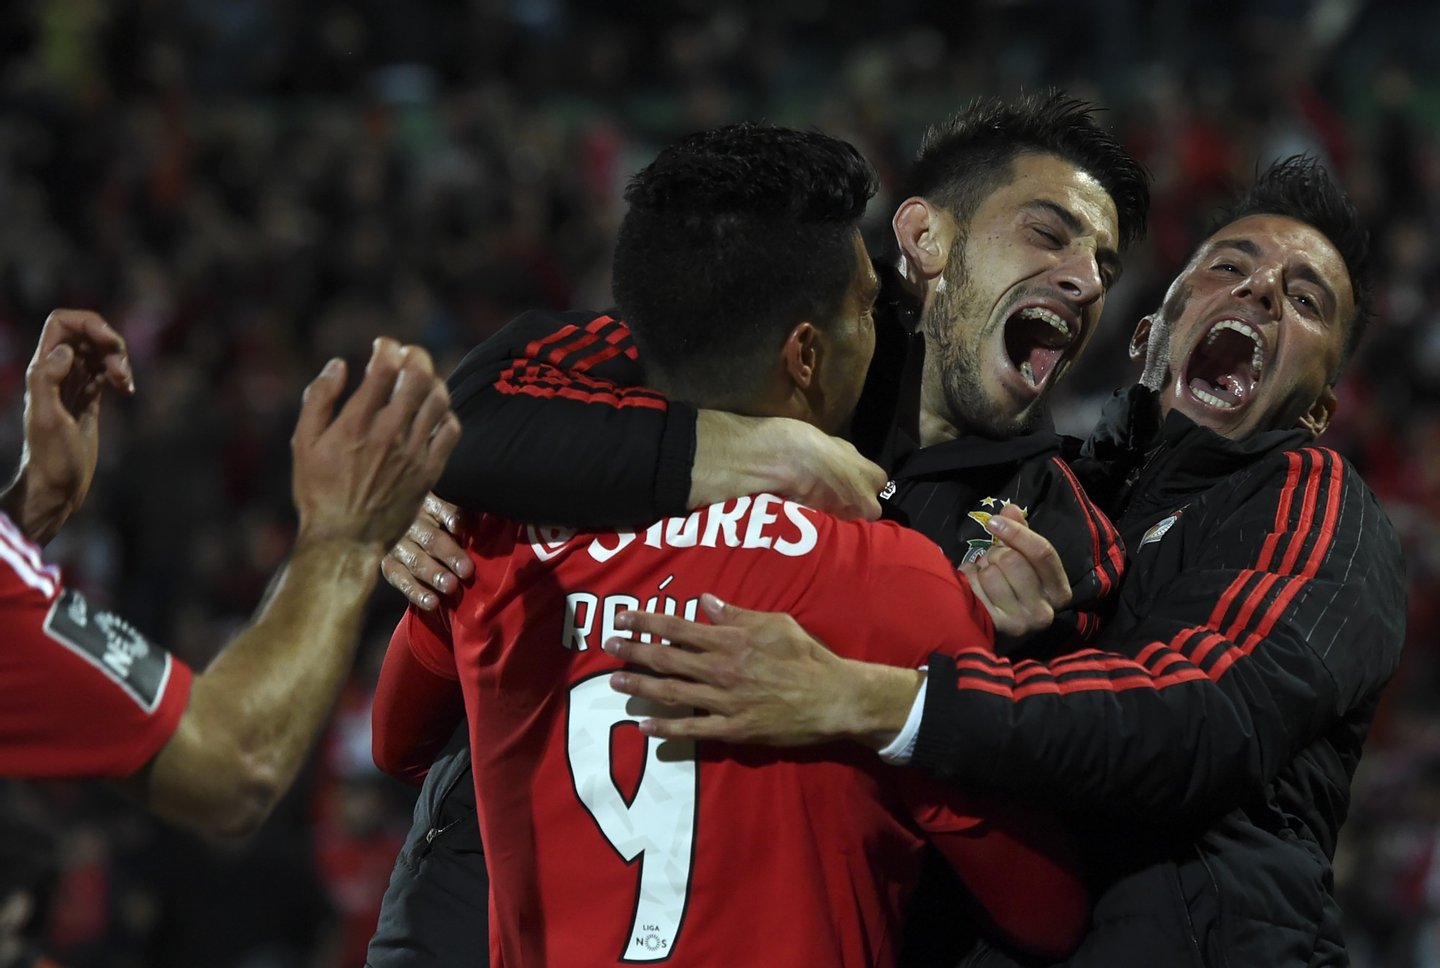 Benfica's Mexican forward Raul Jimenez (L) celebrates with teammates after scoring a goal during the Portuguese league football match Rio Ave FC vs SL Benfica at the Dos Arcos stadium in Vila do Conde on April 24, 2016. / AFP / FRANCISCO LEONG (Photo credit should read FRANCISCO LEONG/AFP/Getty Images)